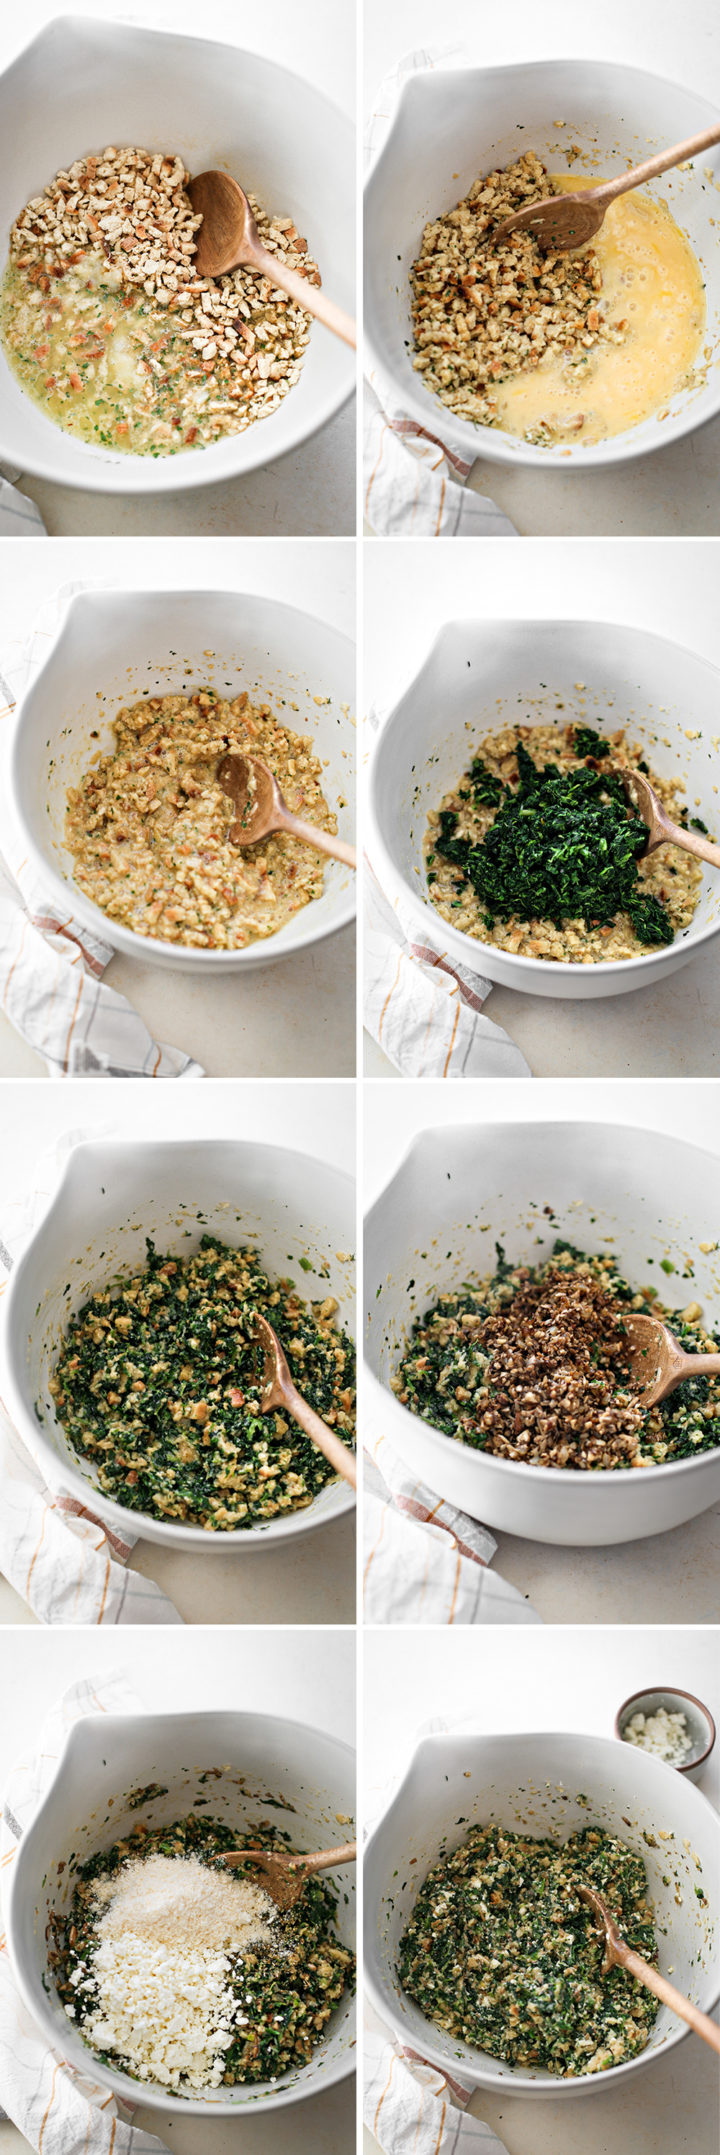 step by step photos showing how to make spinach balls